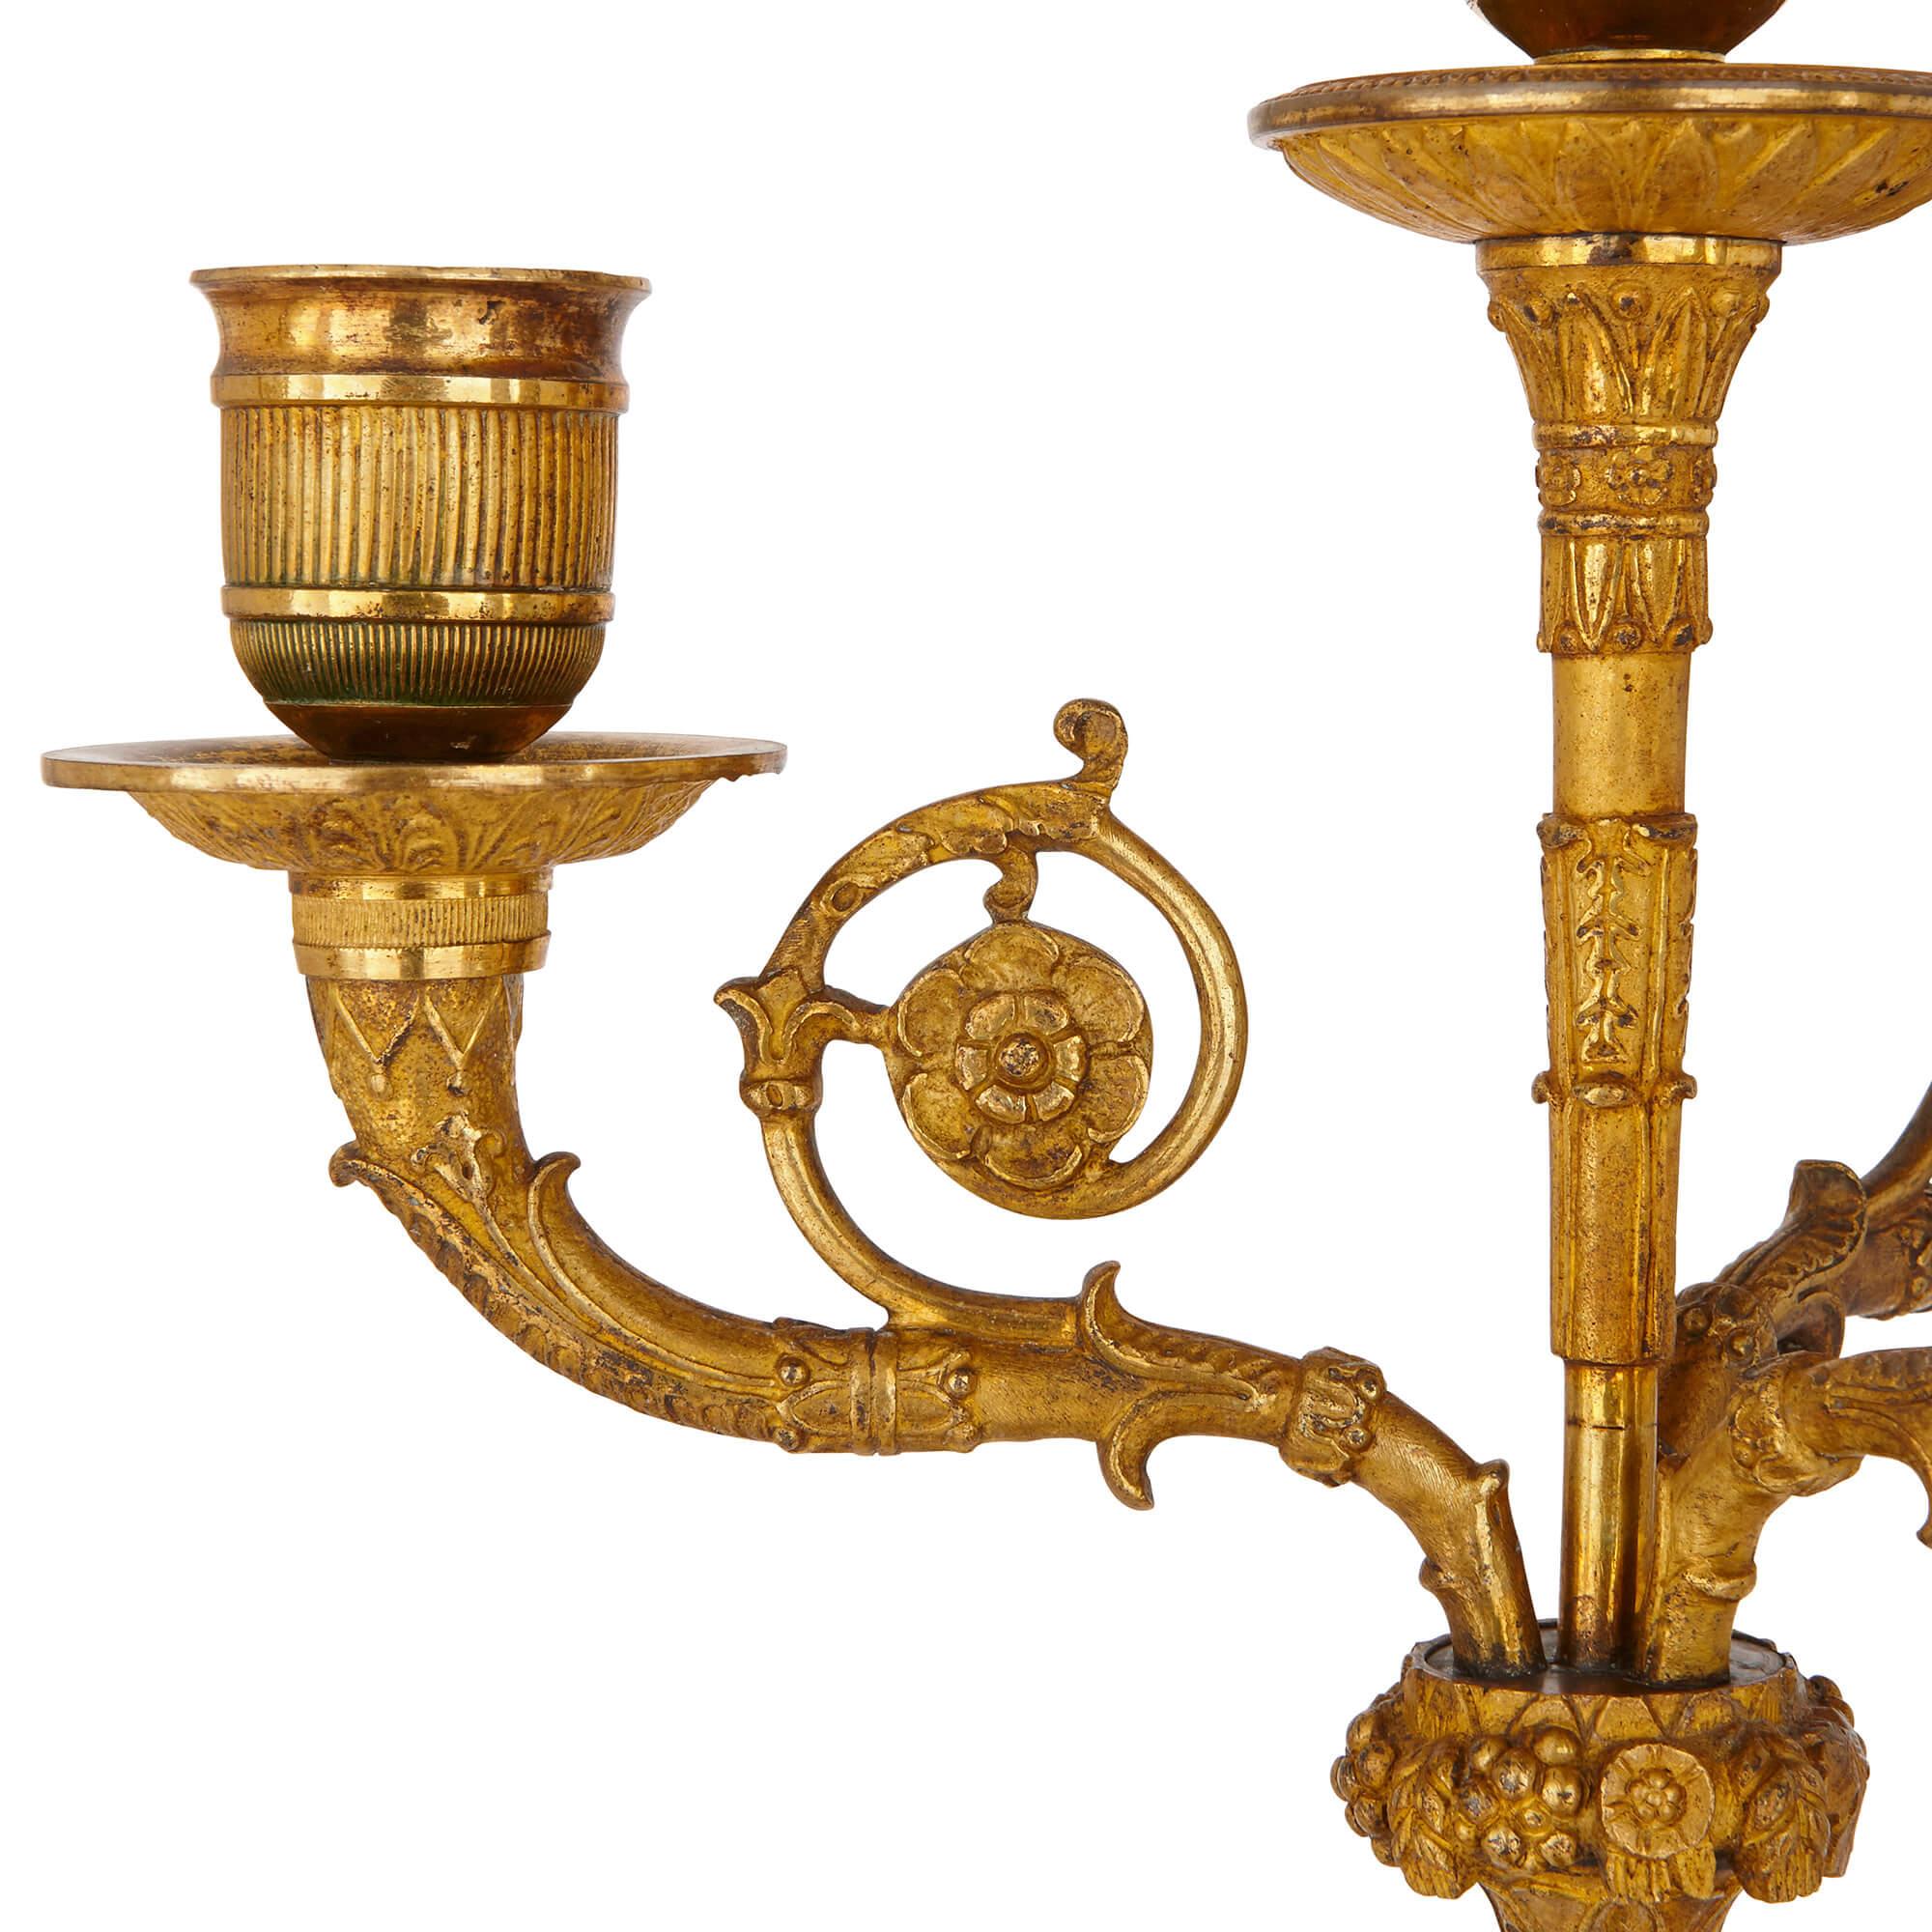 Two Early 19th Century French Empire Gilt Bronze Candelabra In Excellent Condition For Sale In London, GB